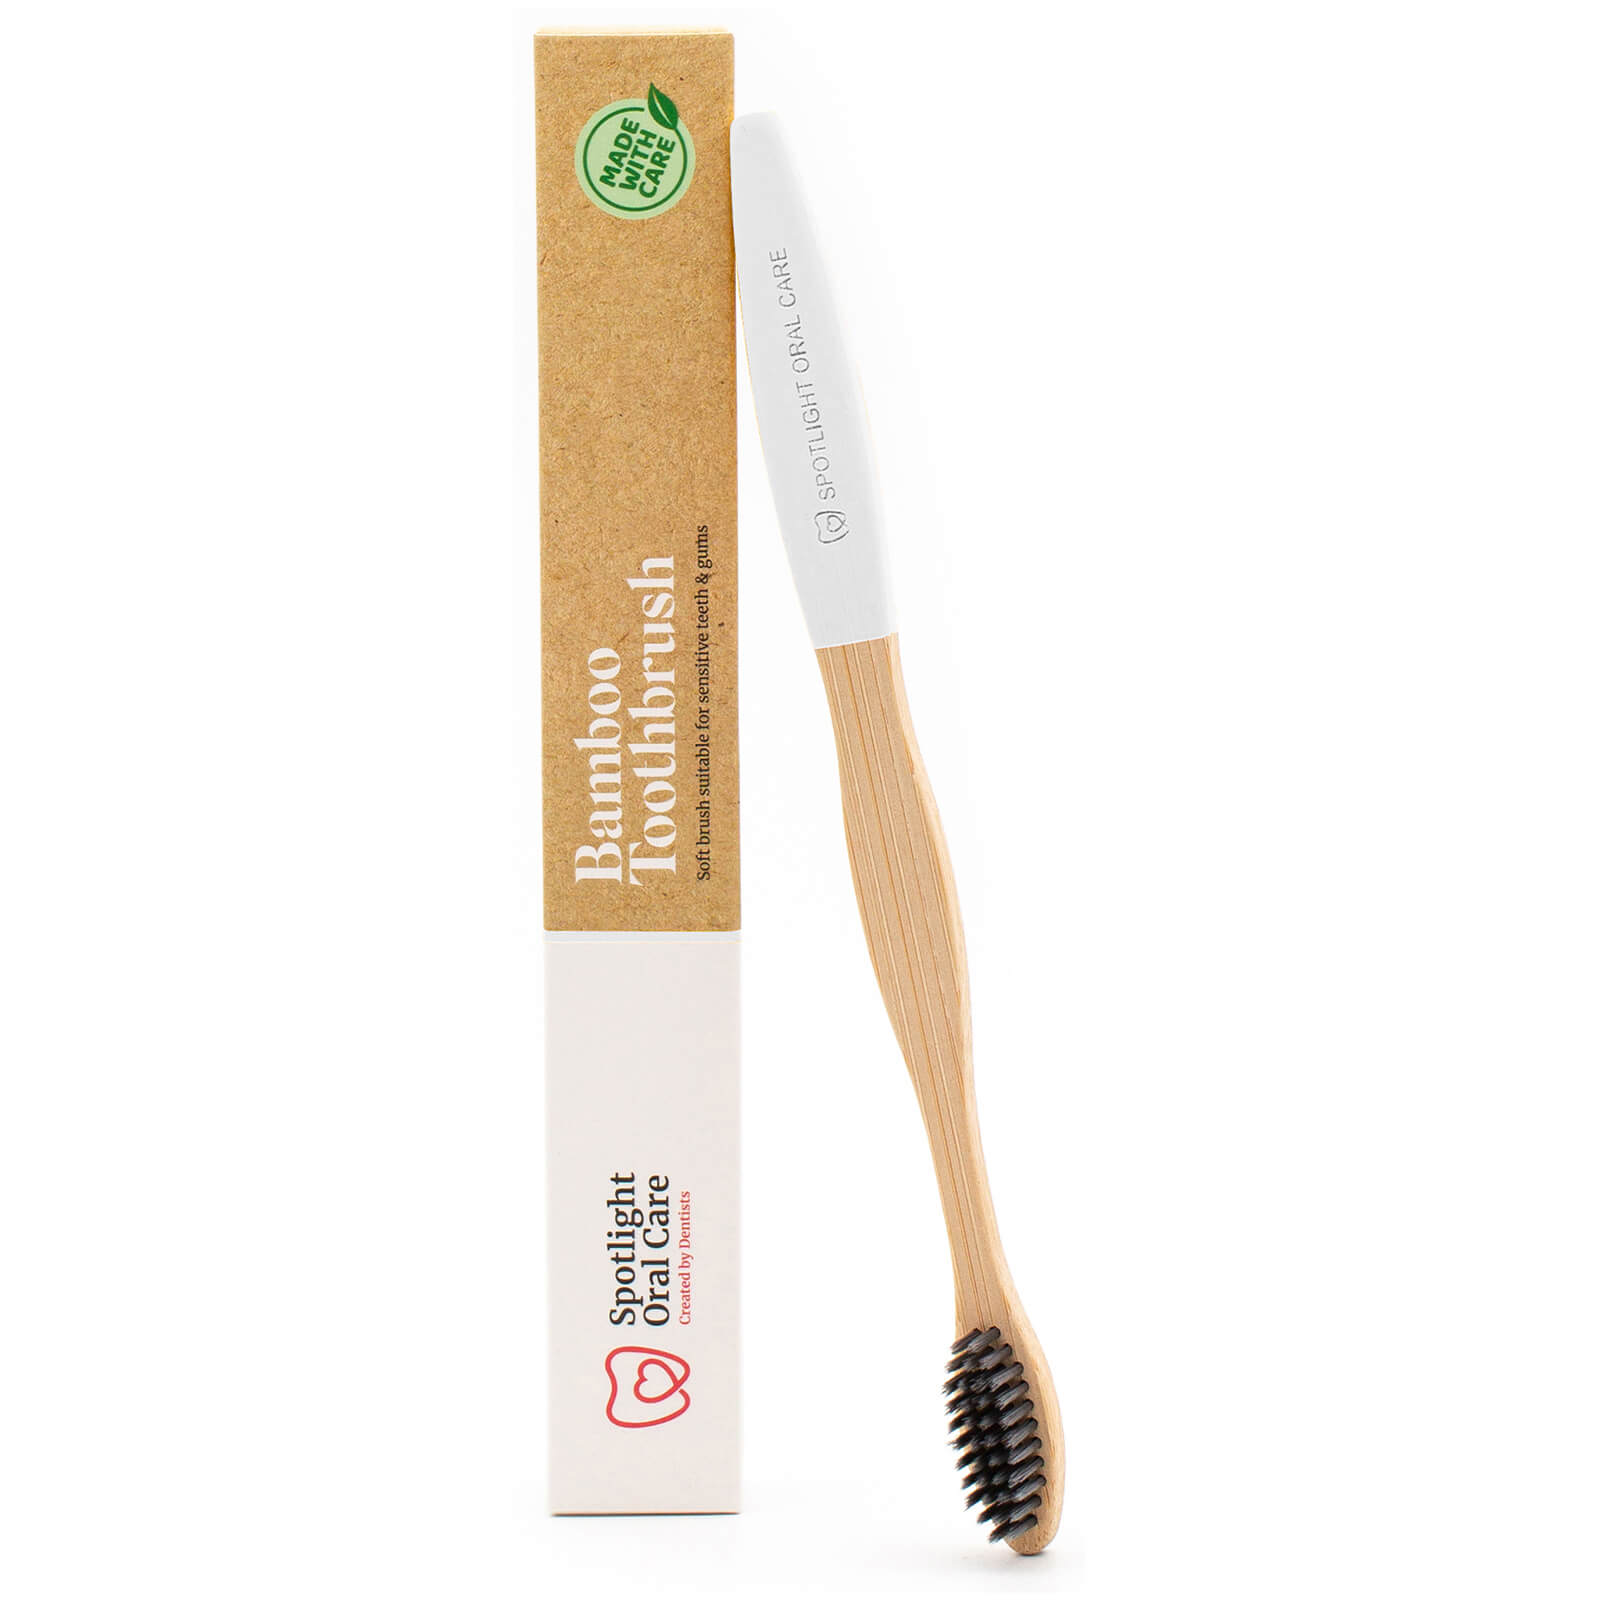 Spotlight Oral Care Bamboo Toothbrush - White